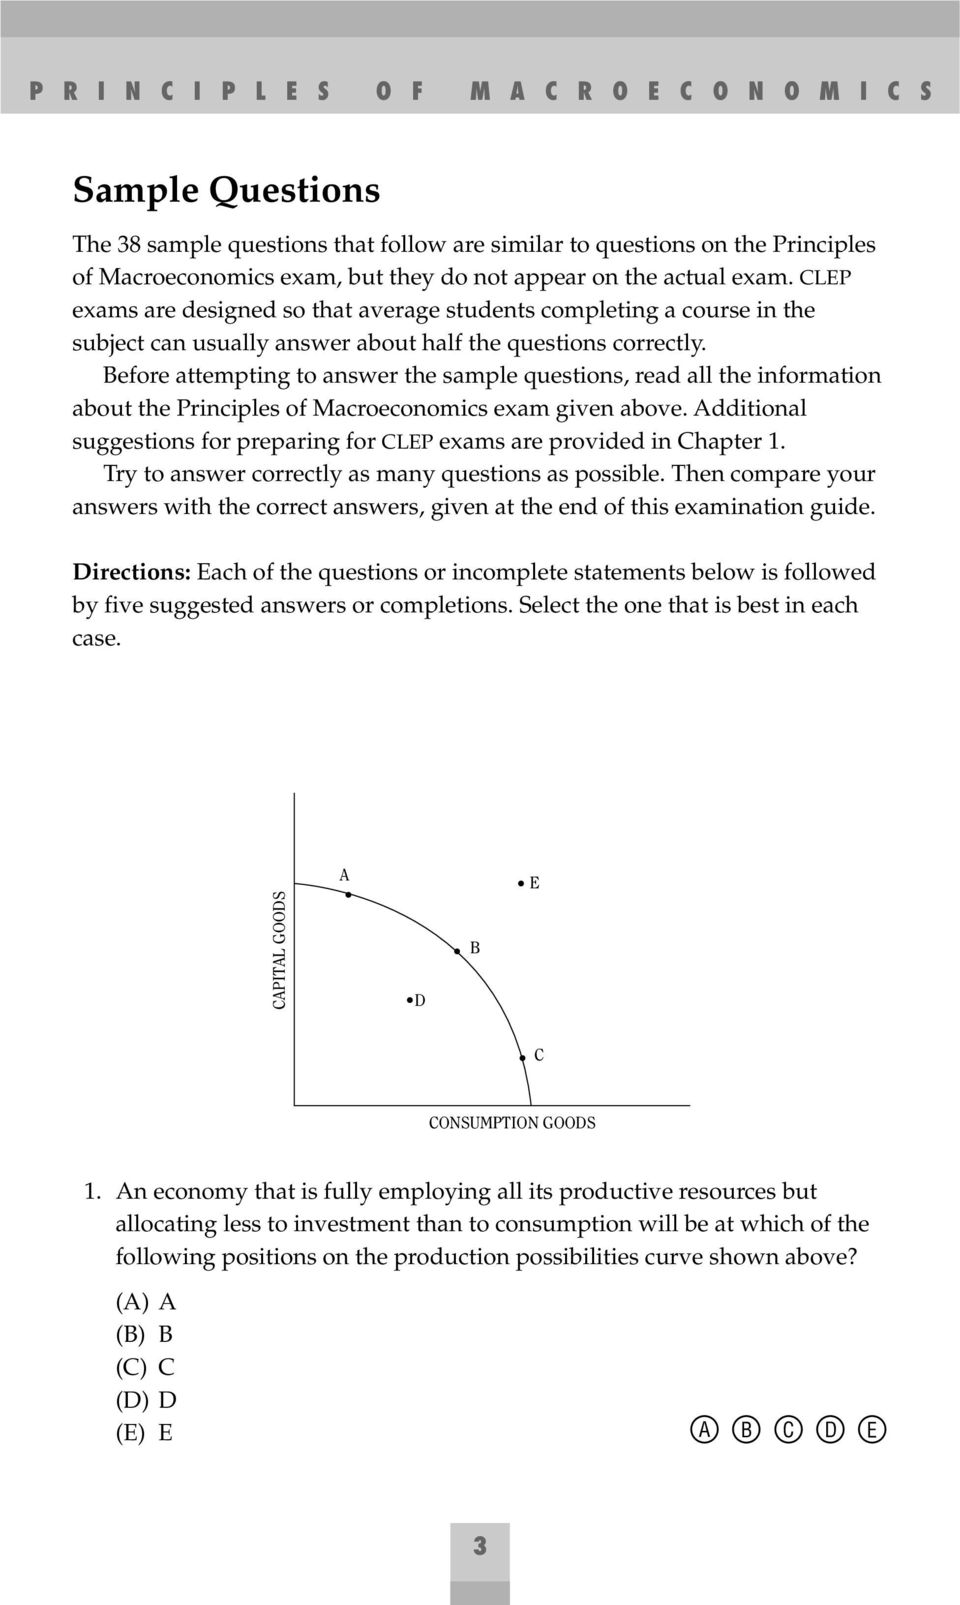 Before attempting to answer the sample questions, read all the information about the Principles of Macroeconomics exam given above.